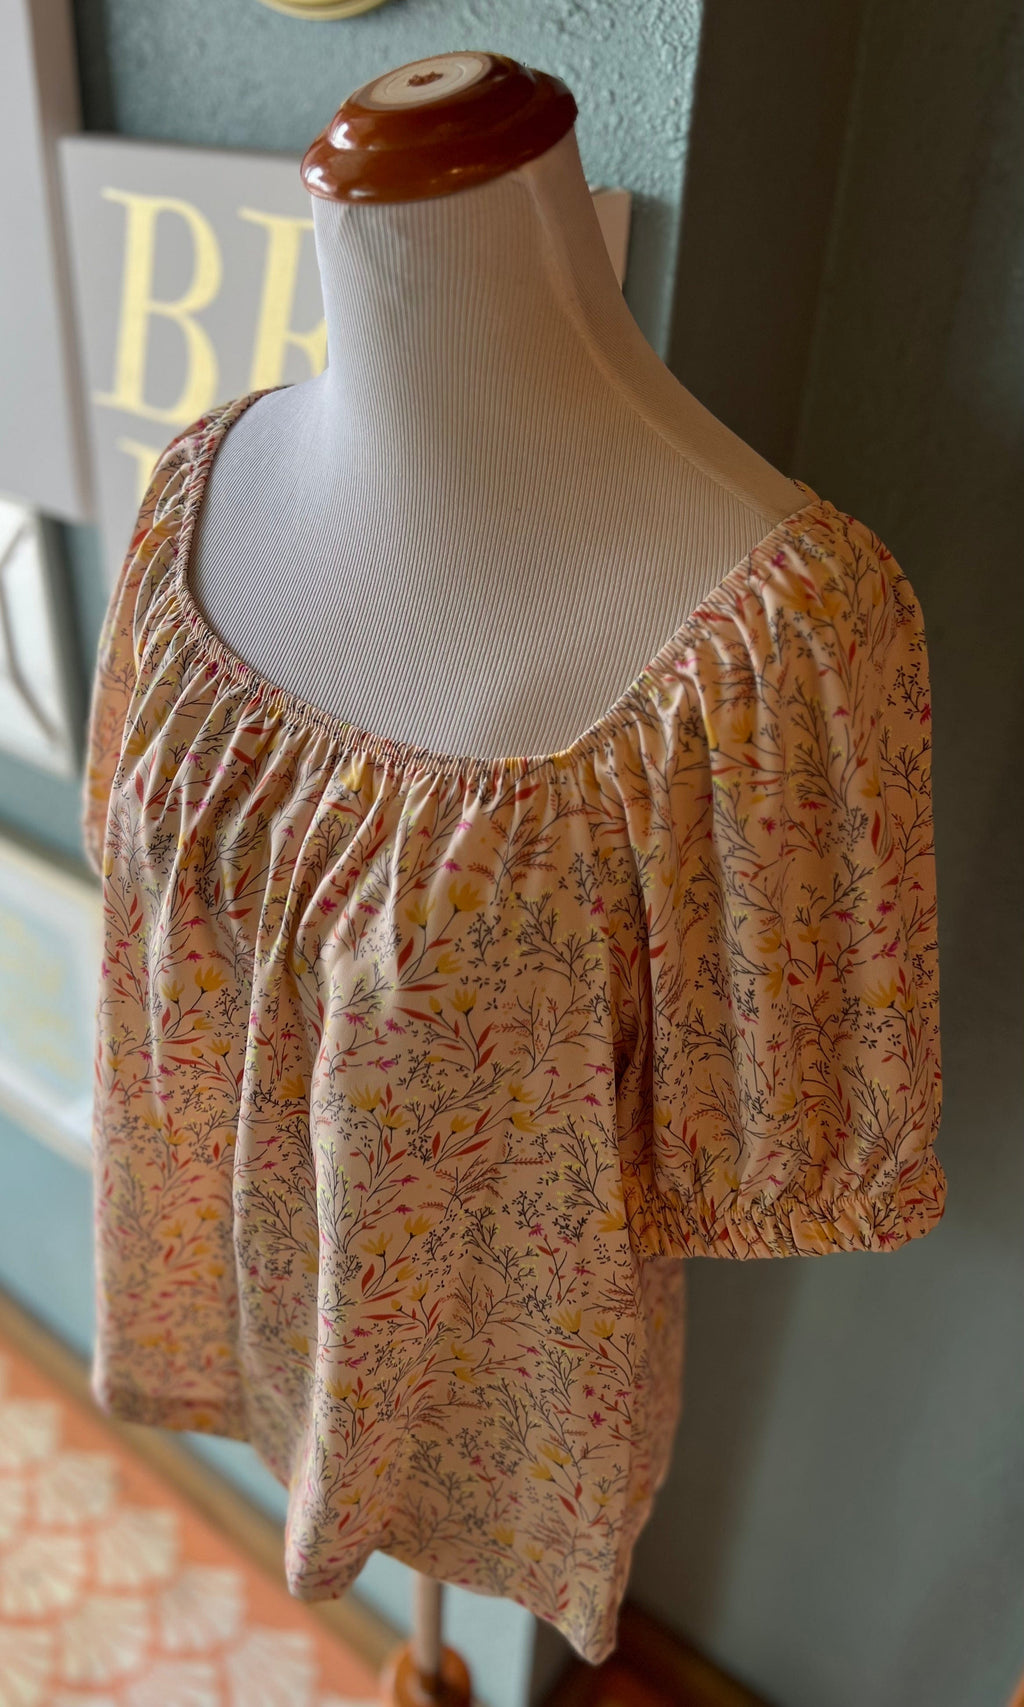 WestMoon Blush Floral Summer Top